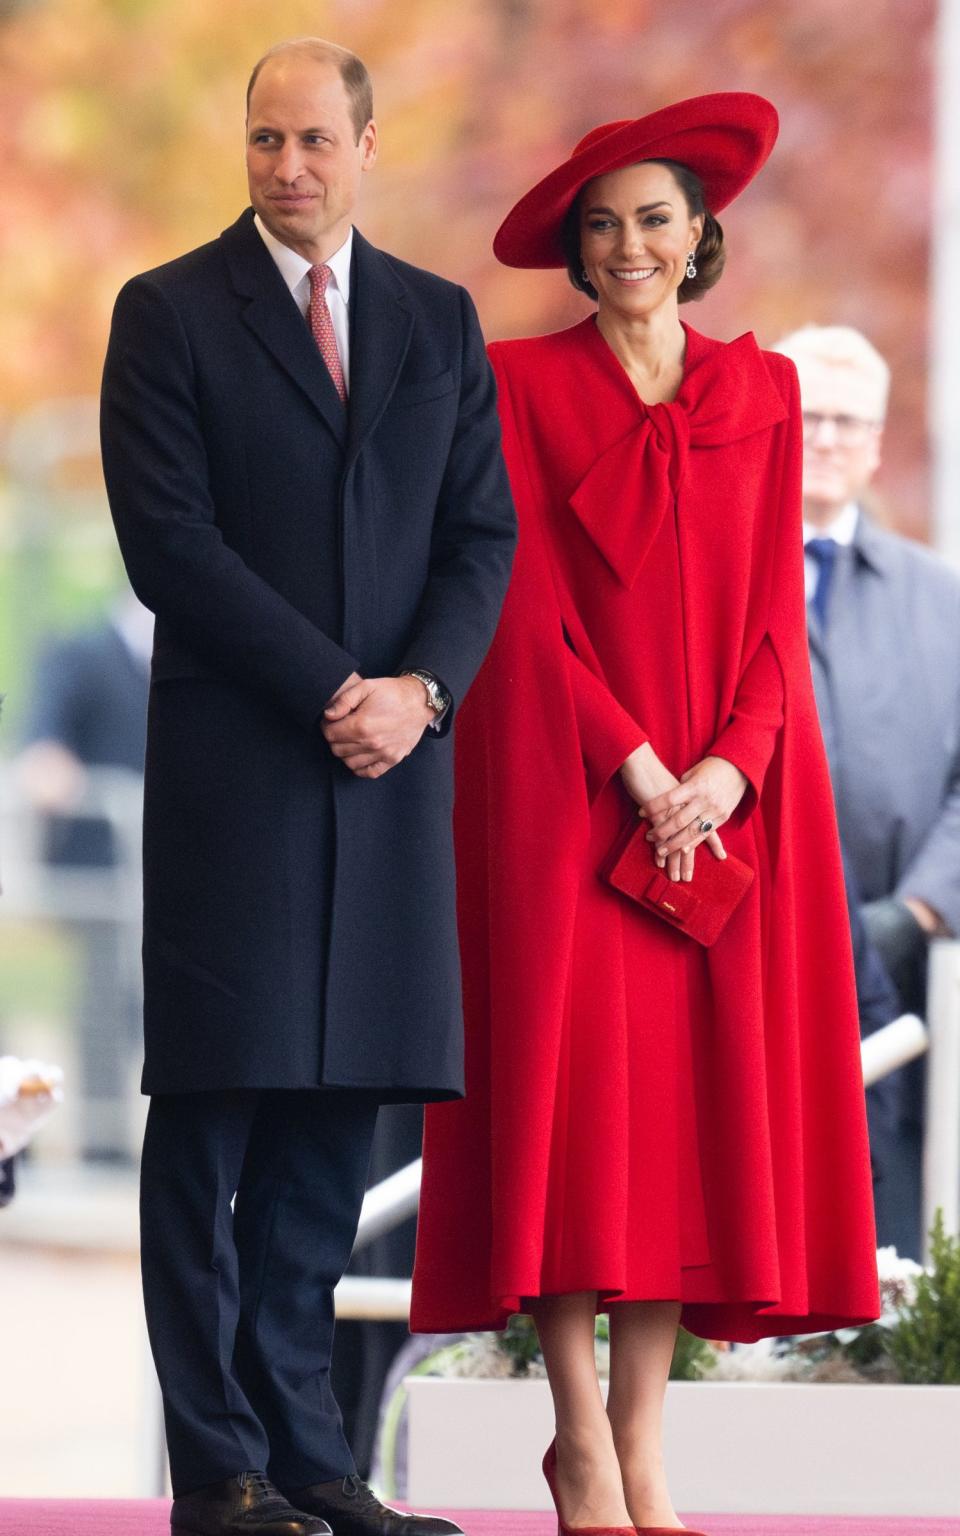 Catherine, Princess of Wales attends a ceremonial welcome for the President and First Lady of the Republic of Korea during the Horse Guards Parade on November 21, 2023 in London, England